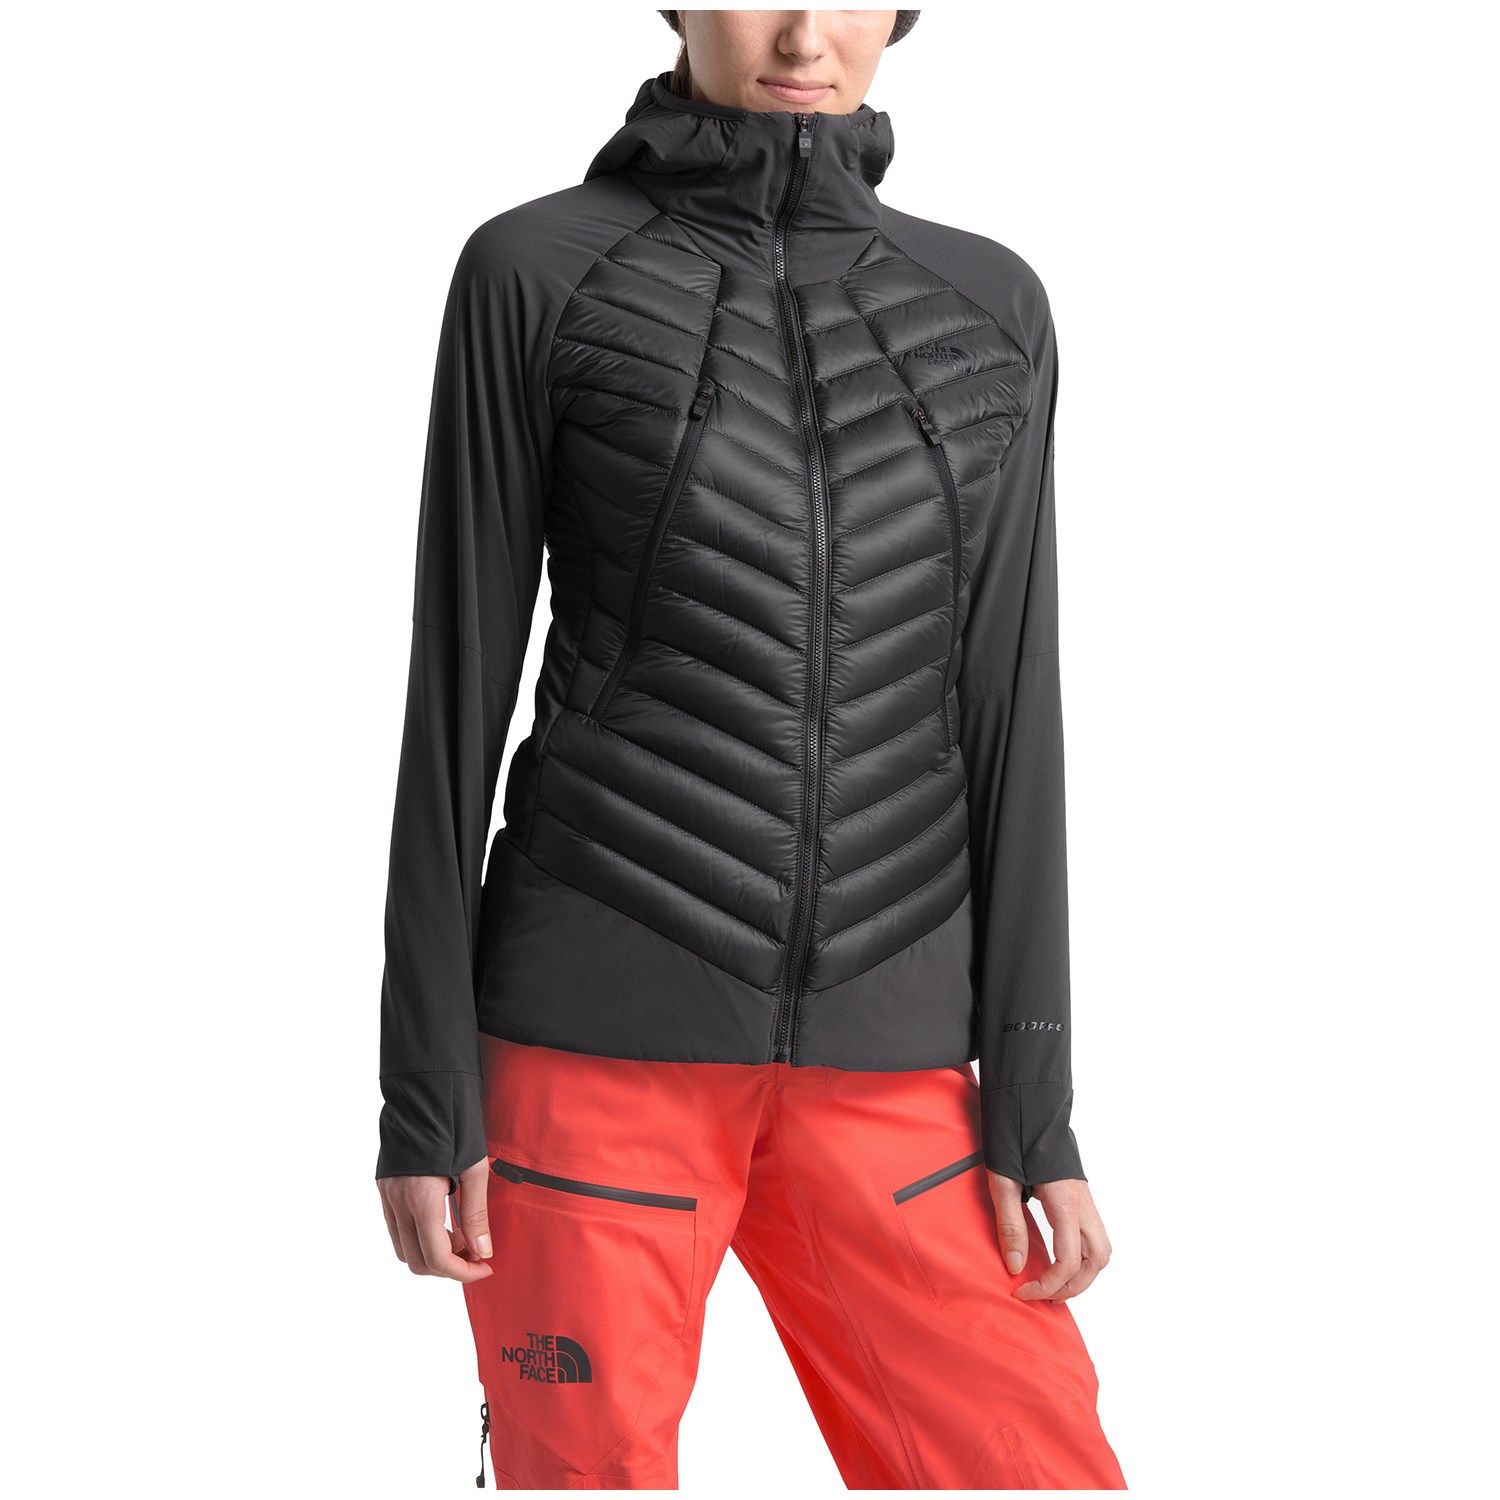 The North Face Unlimited Jacket Women S Evo